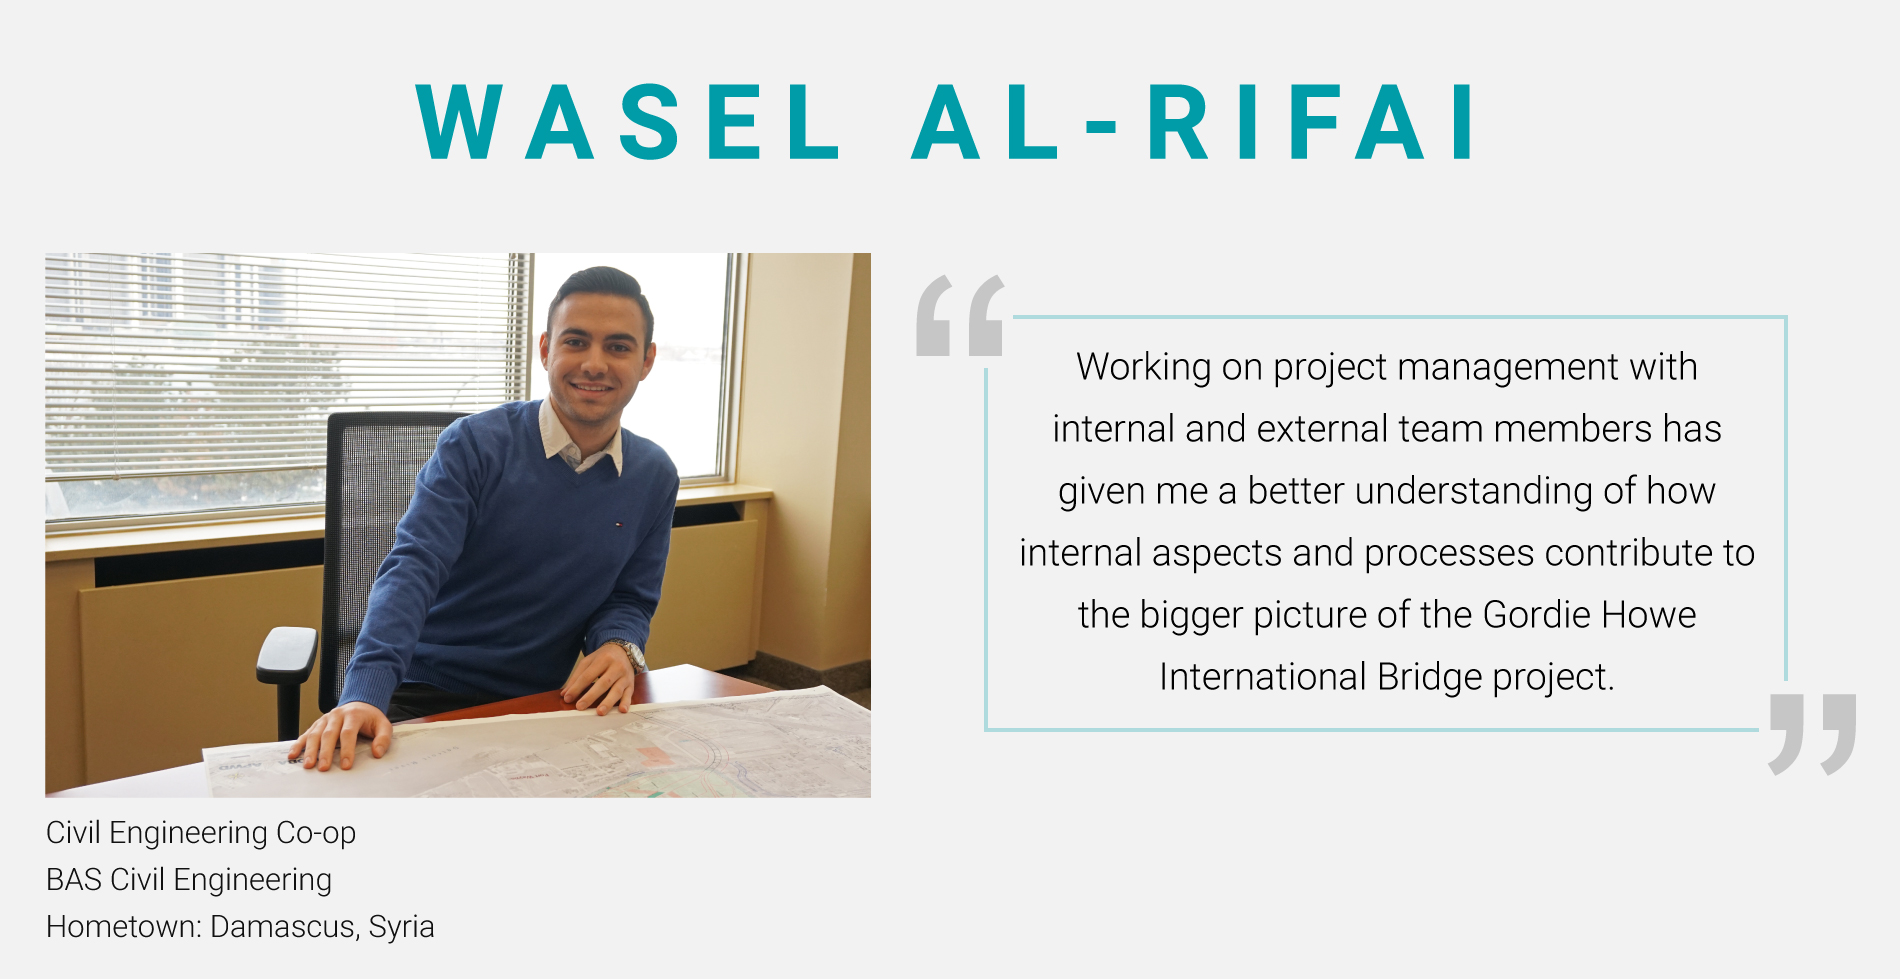 Wasel Al-Rifai, Civil Engineering Co-op. BAS Civil Engineering. "Working on project management with internal and external team members has given me a better understanding of how internal aspects and processes contribute to the bigger picture of the Gordie Howe International Bridge project."